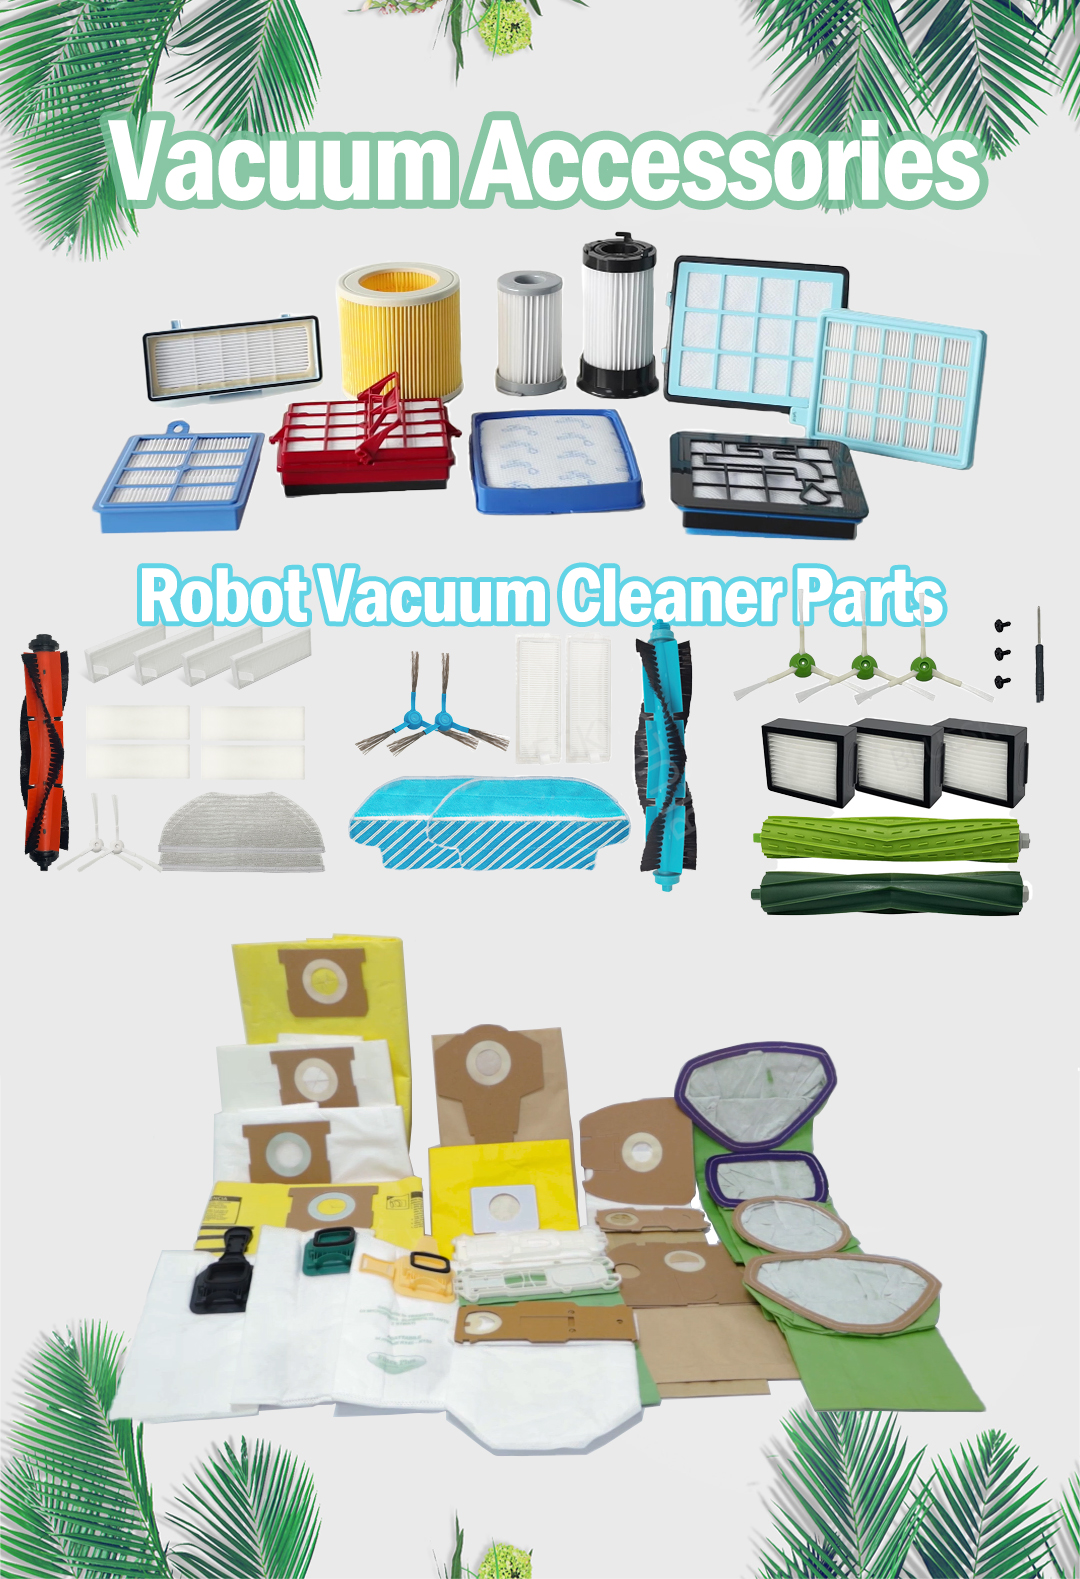 For easier chores, choose a vacuum cleaner or a robot sweeper?